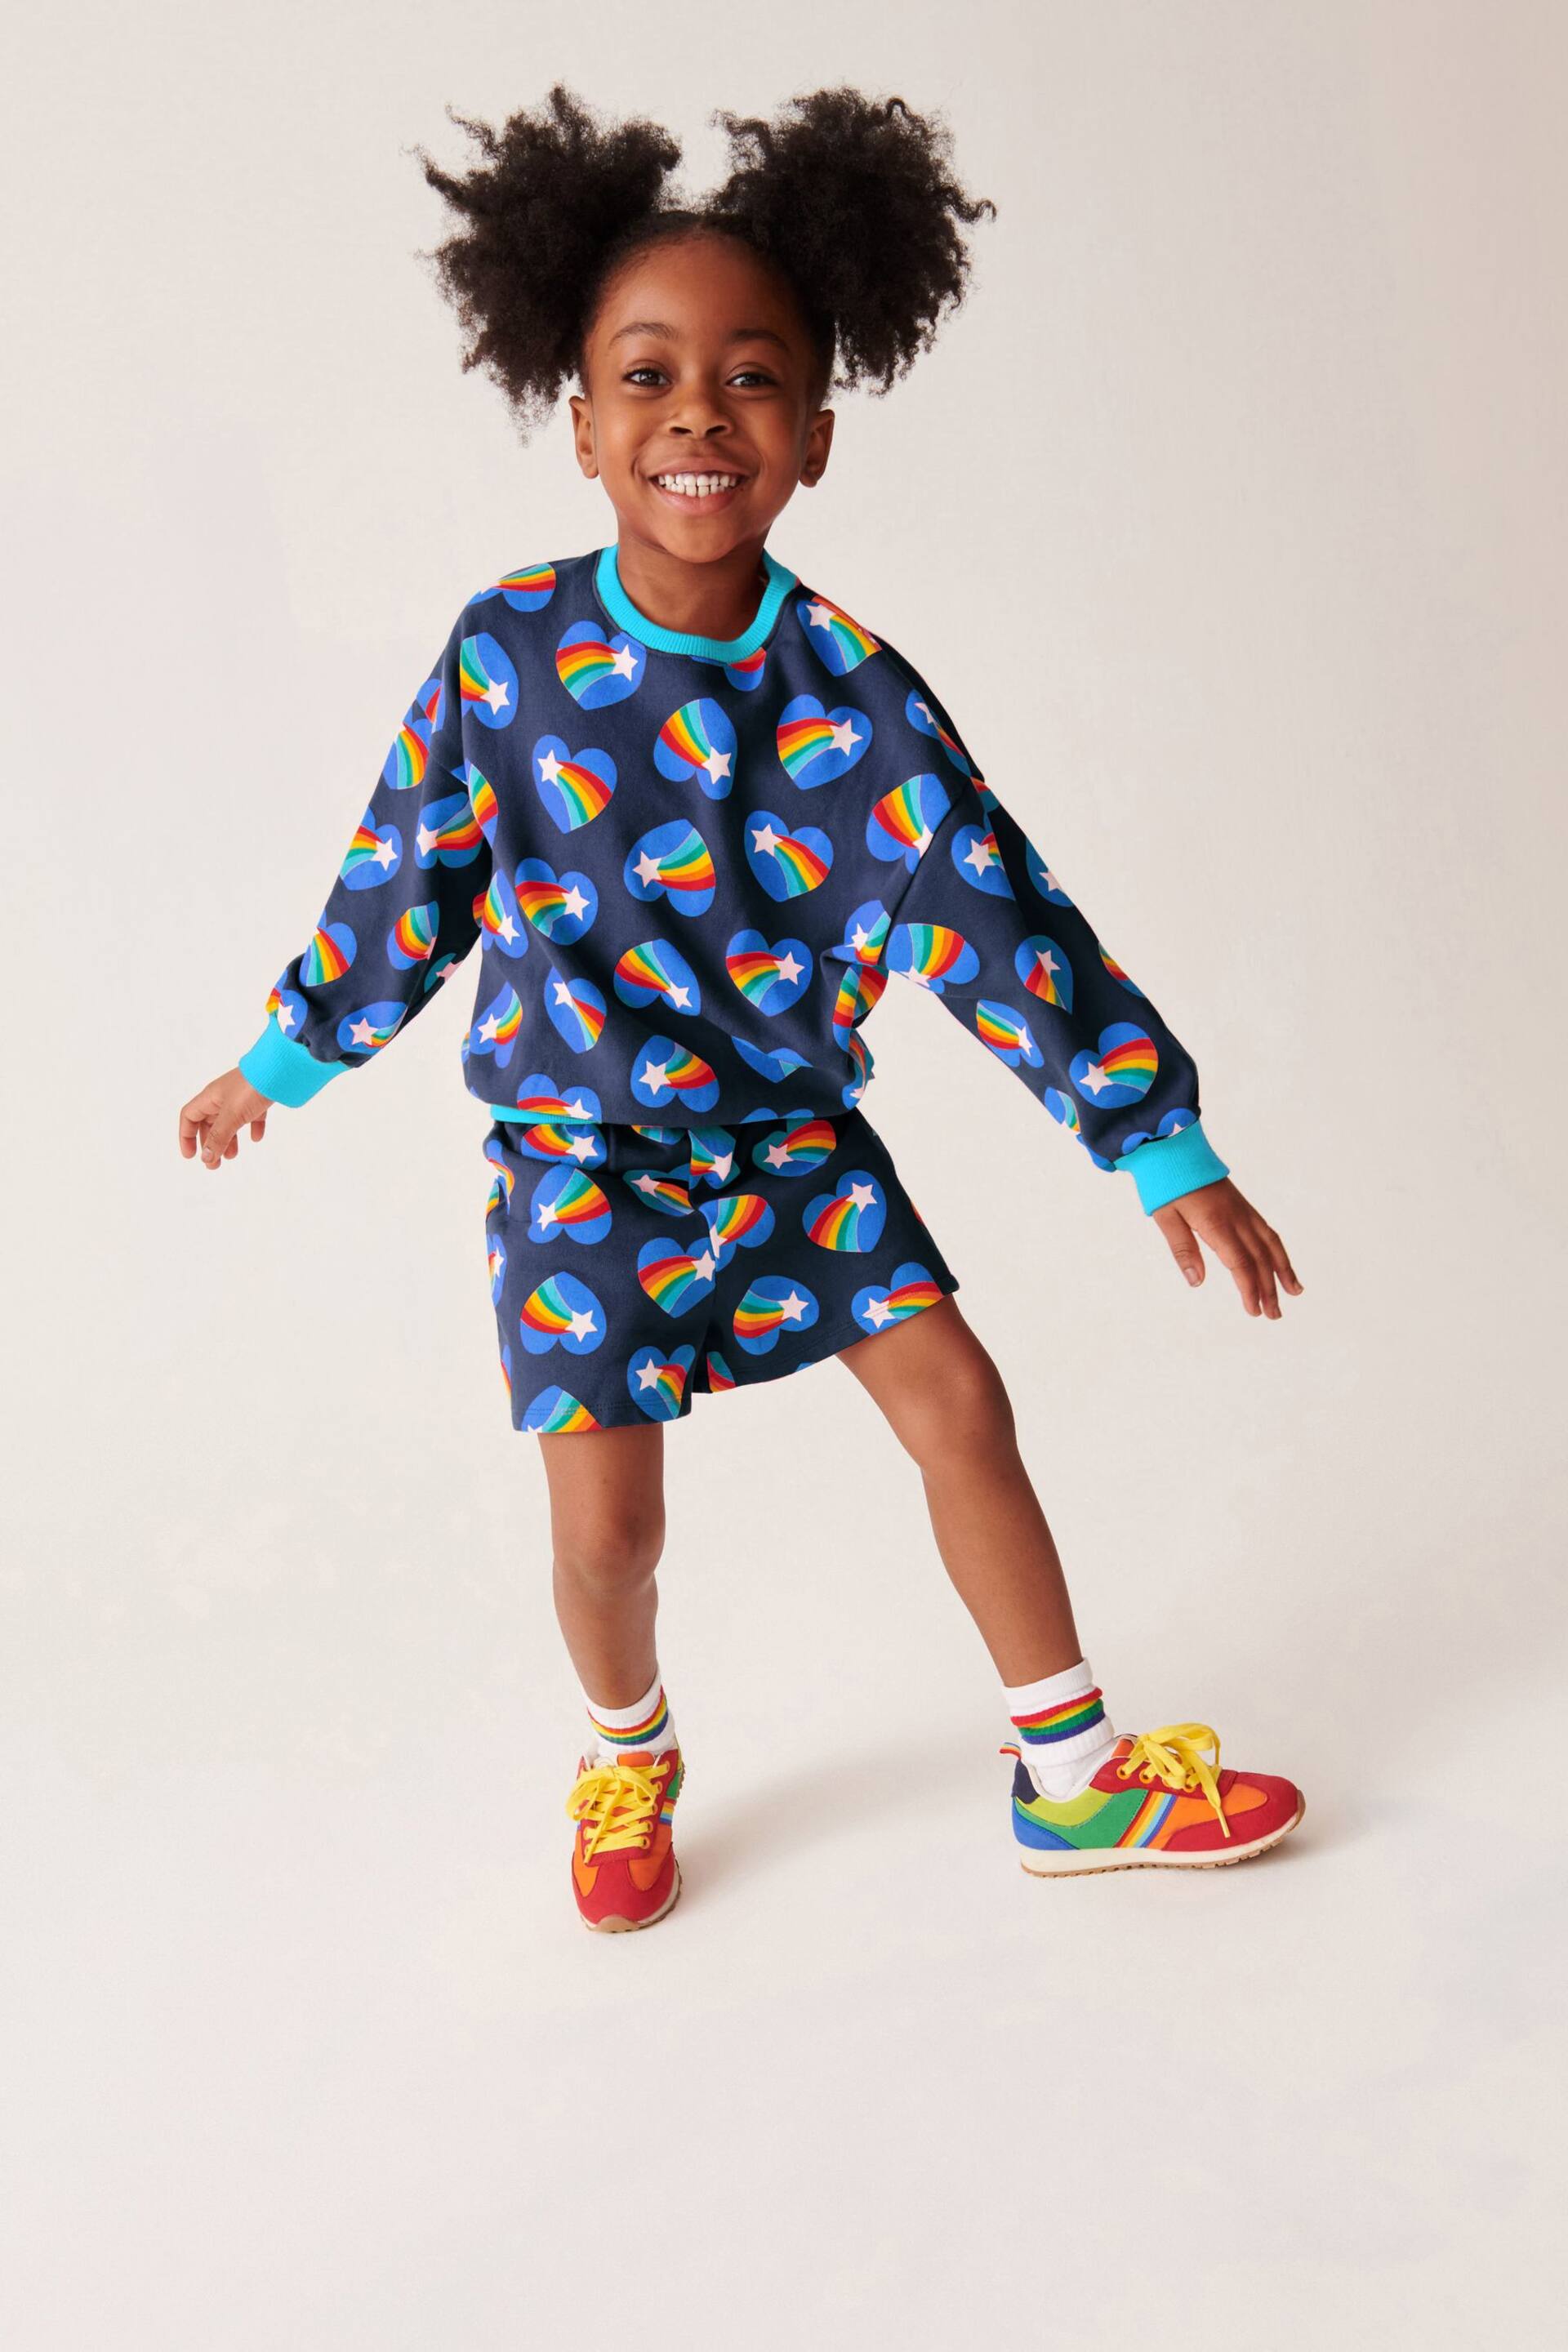 Little Bird by Jools Oliver Blue Rainbow Heart Sweat Top and Short Set - Image 2 of 7